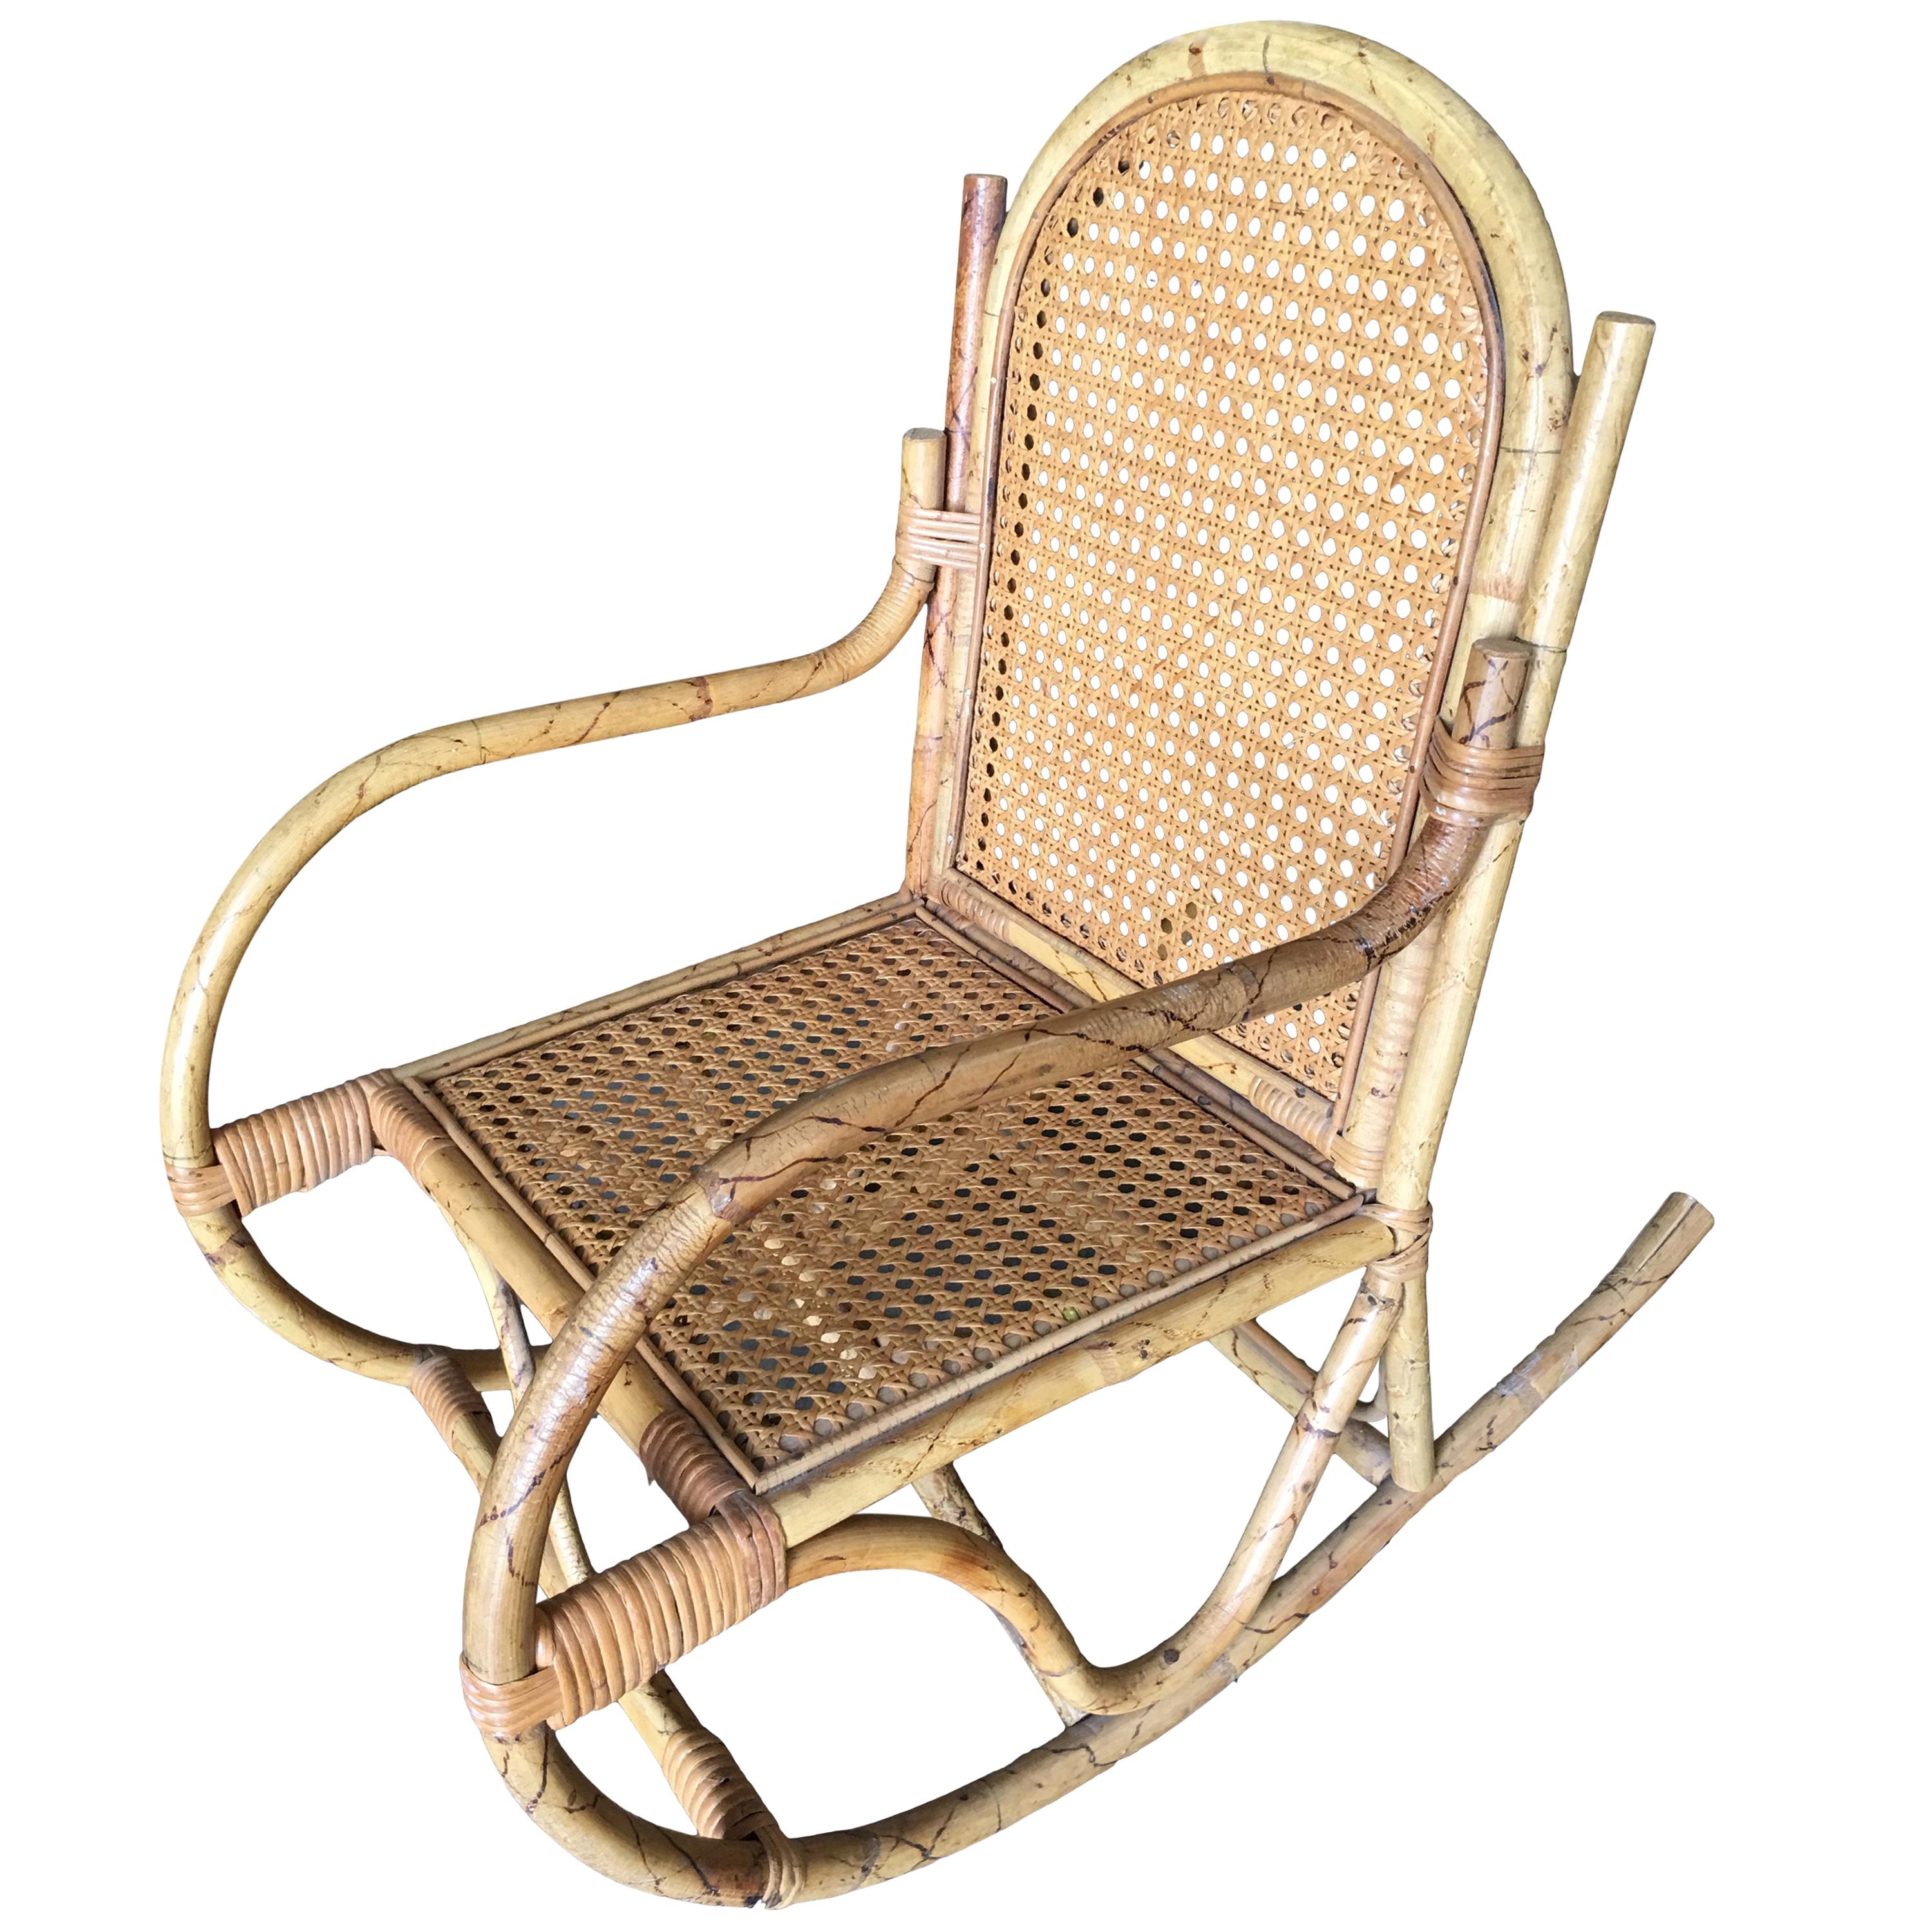 Child Size Rattan Rocking Chair with Wicker Woven Seat, Circa 1950